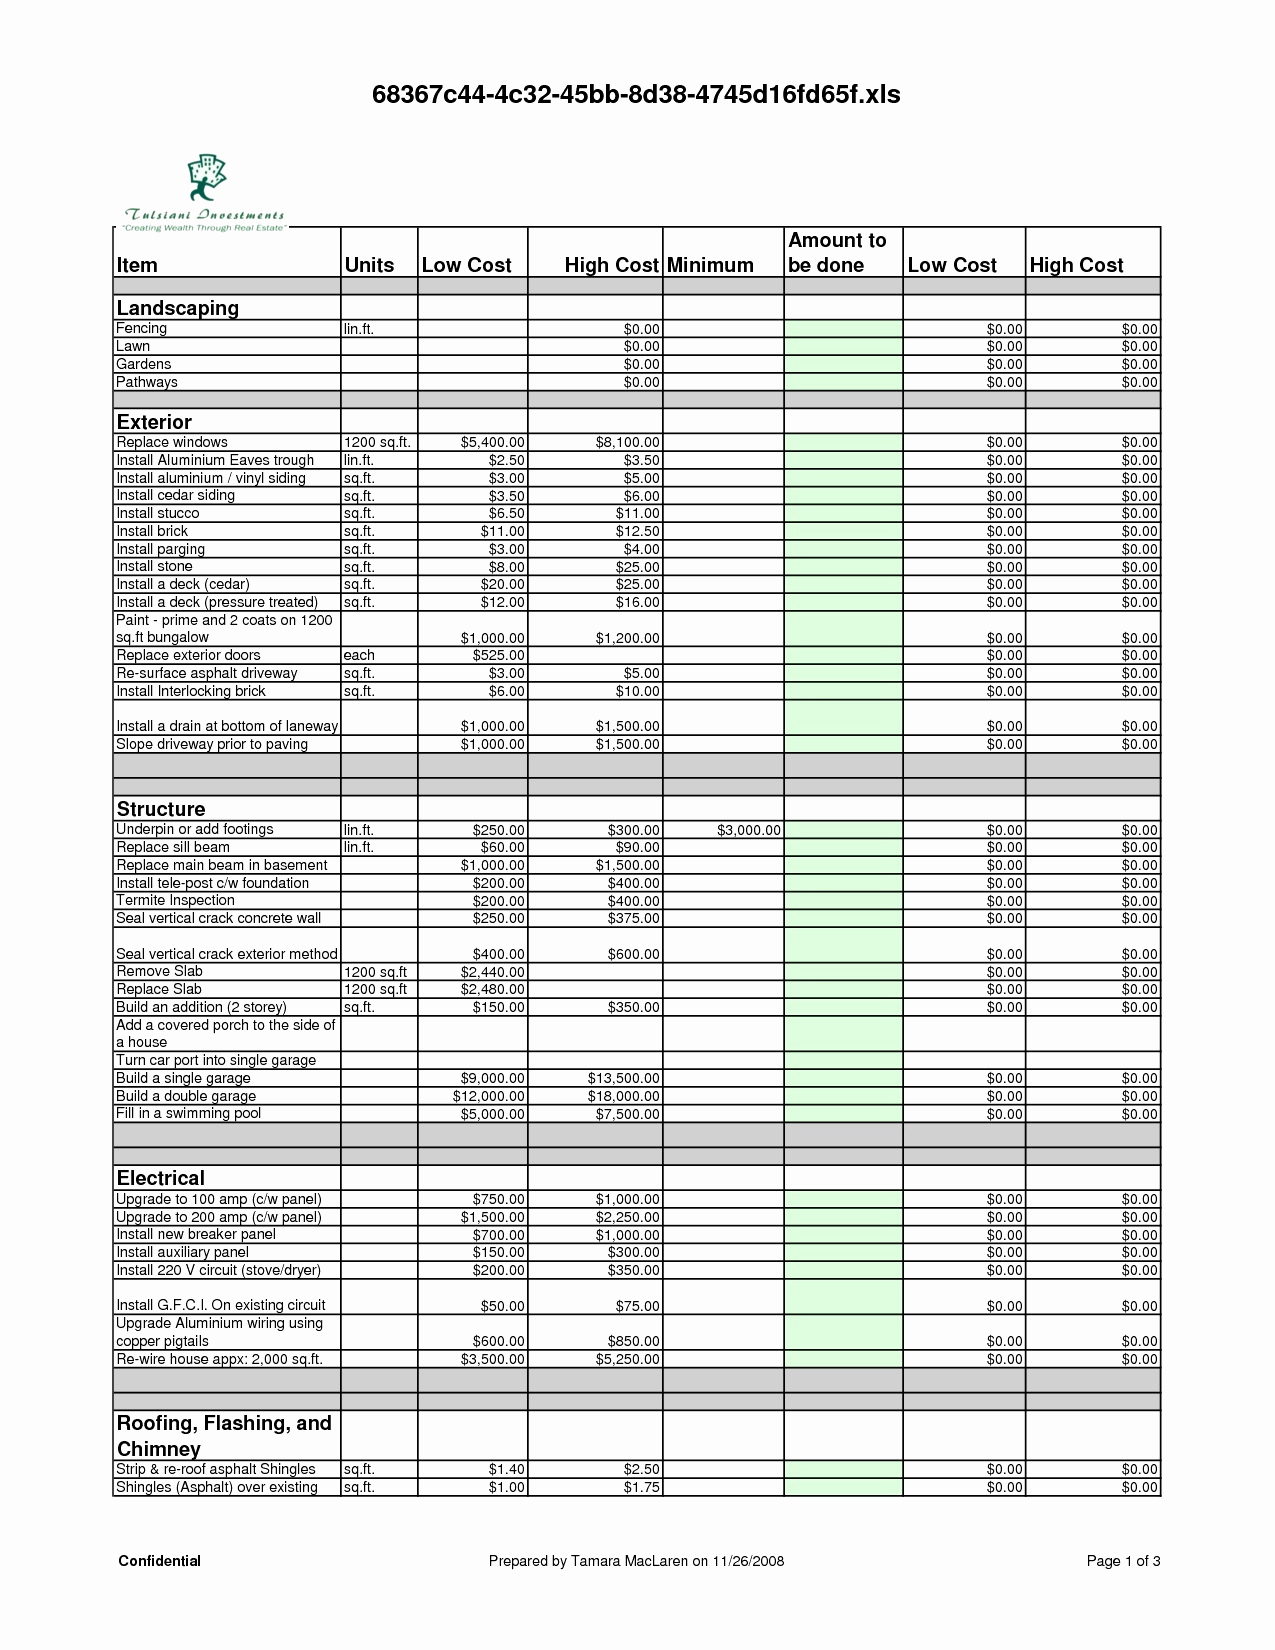 Steel Fabrication Estimating Spreadsheet with Spreadsheet Structural